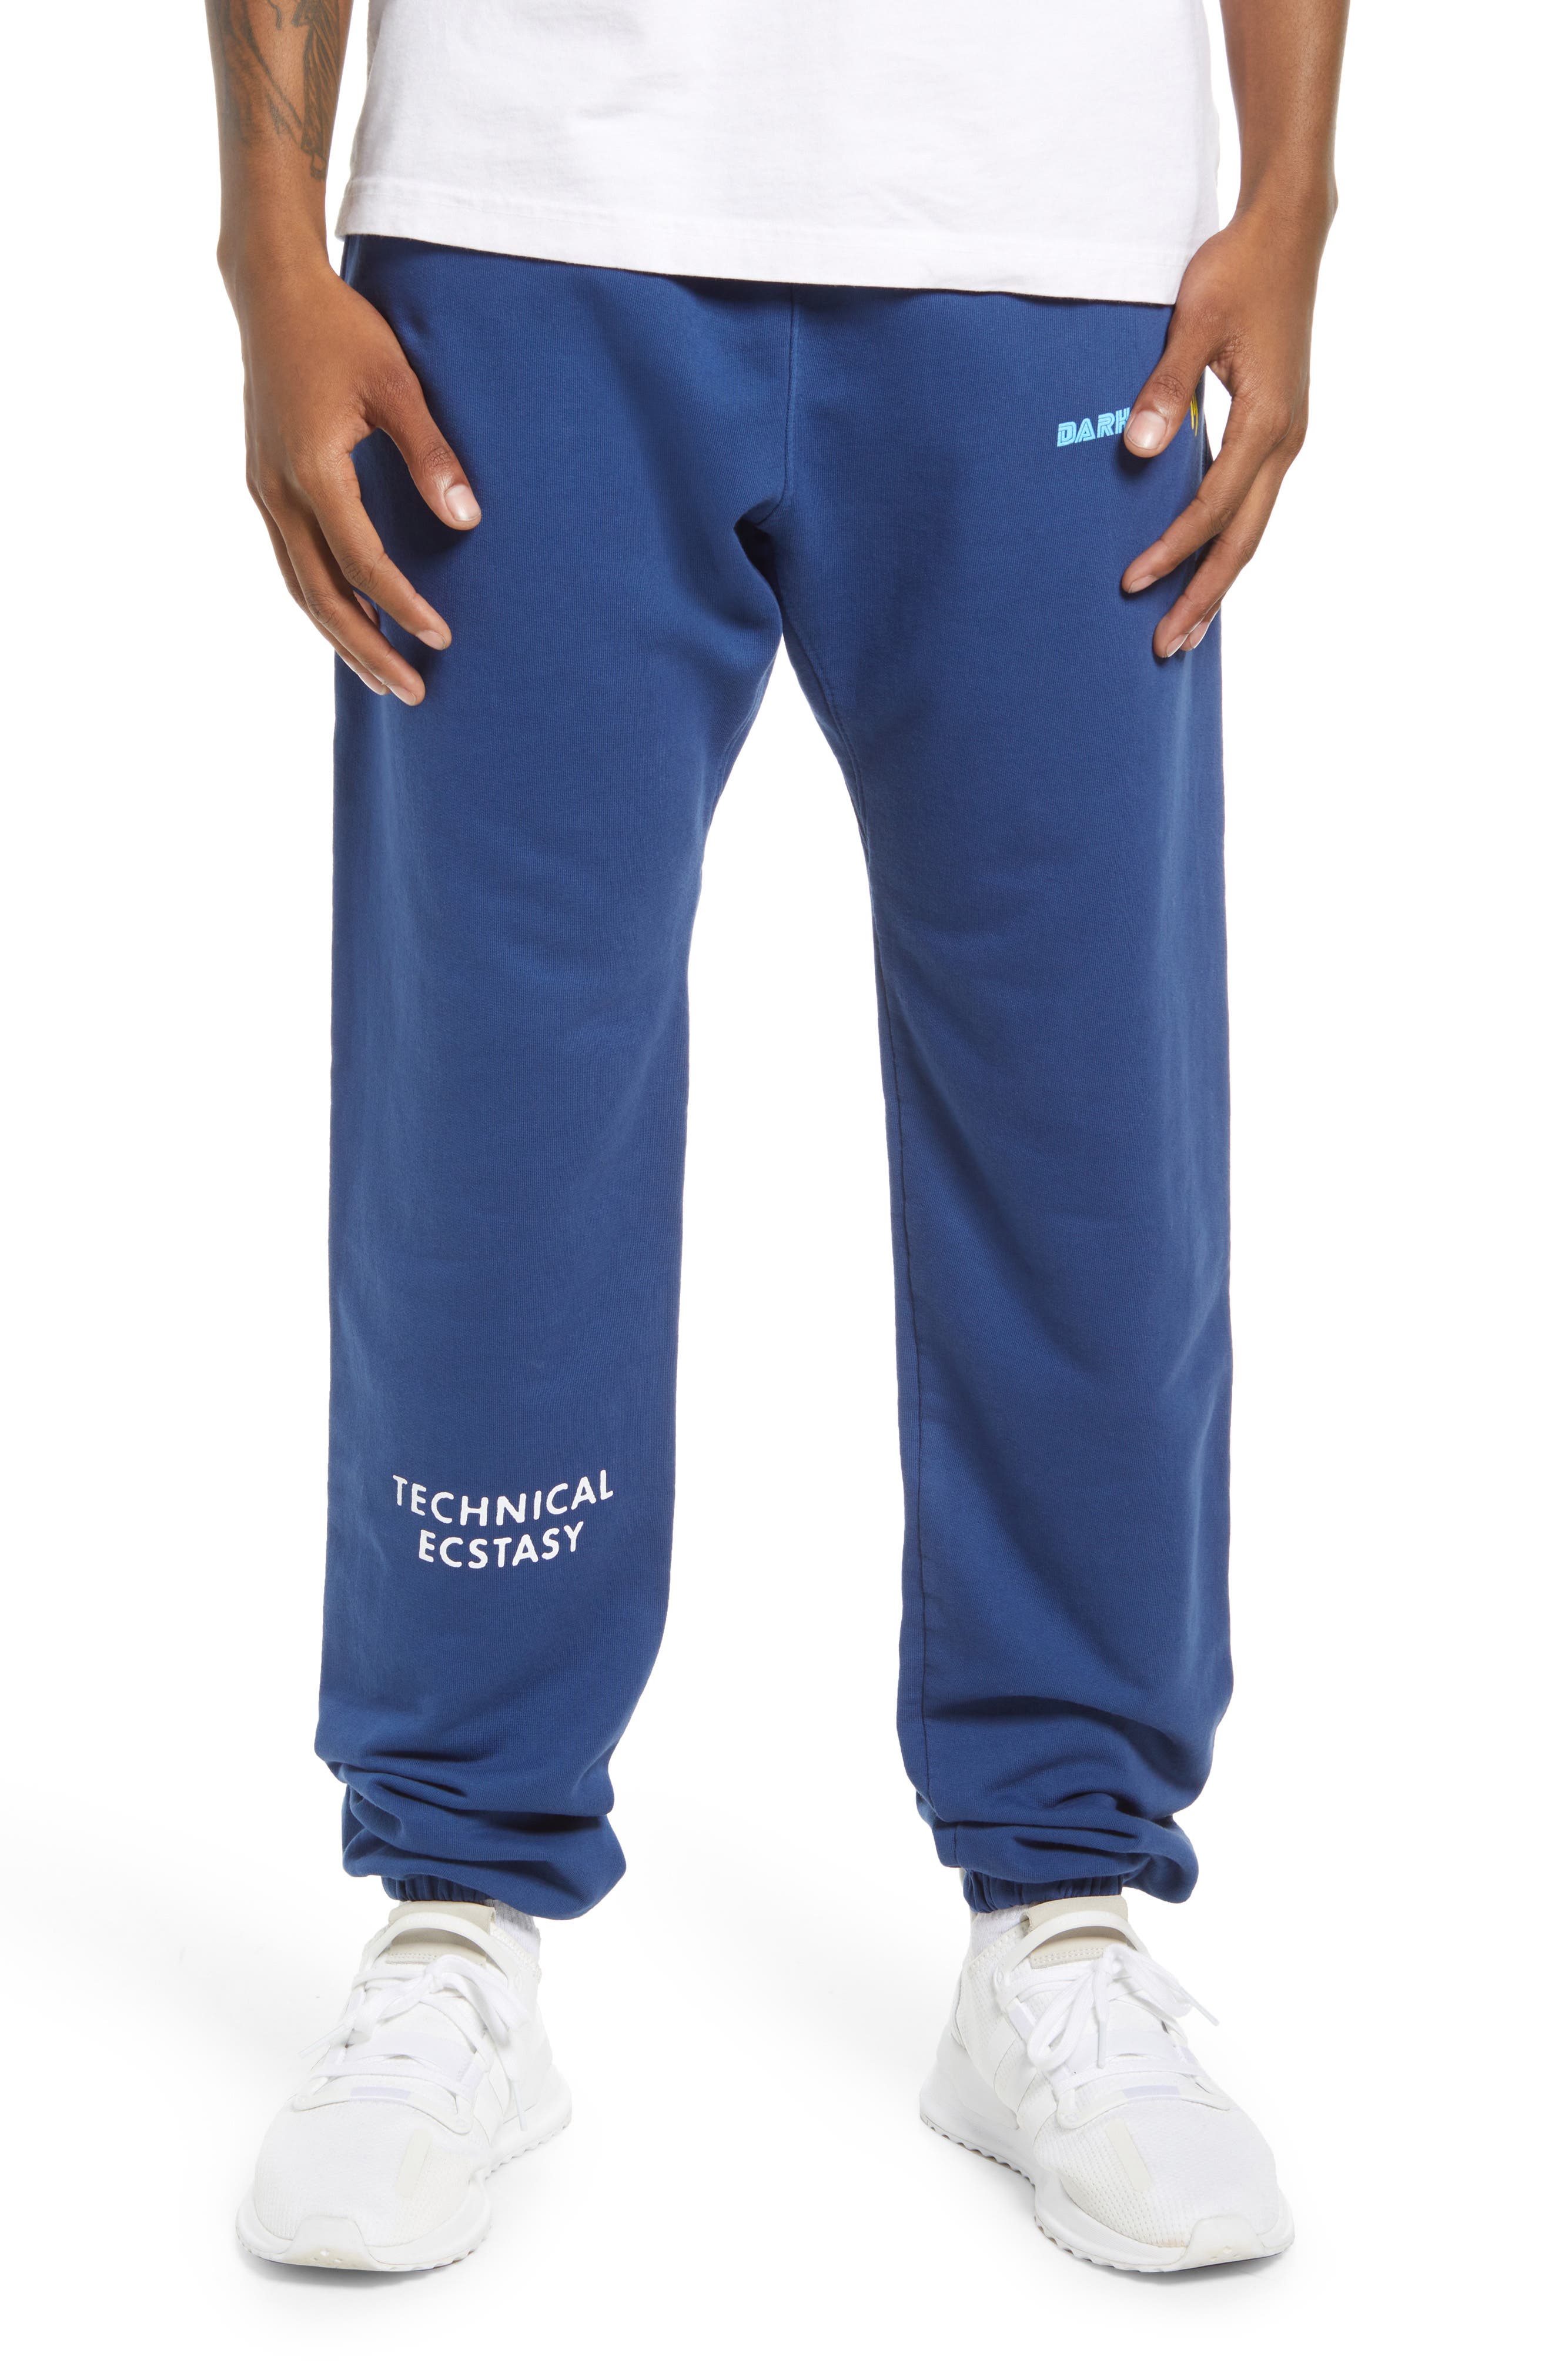 DARKBRIGHT Technical Ecstasy Graphic Sweatpants in Blue at Nordstrom